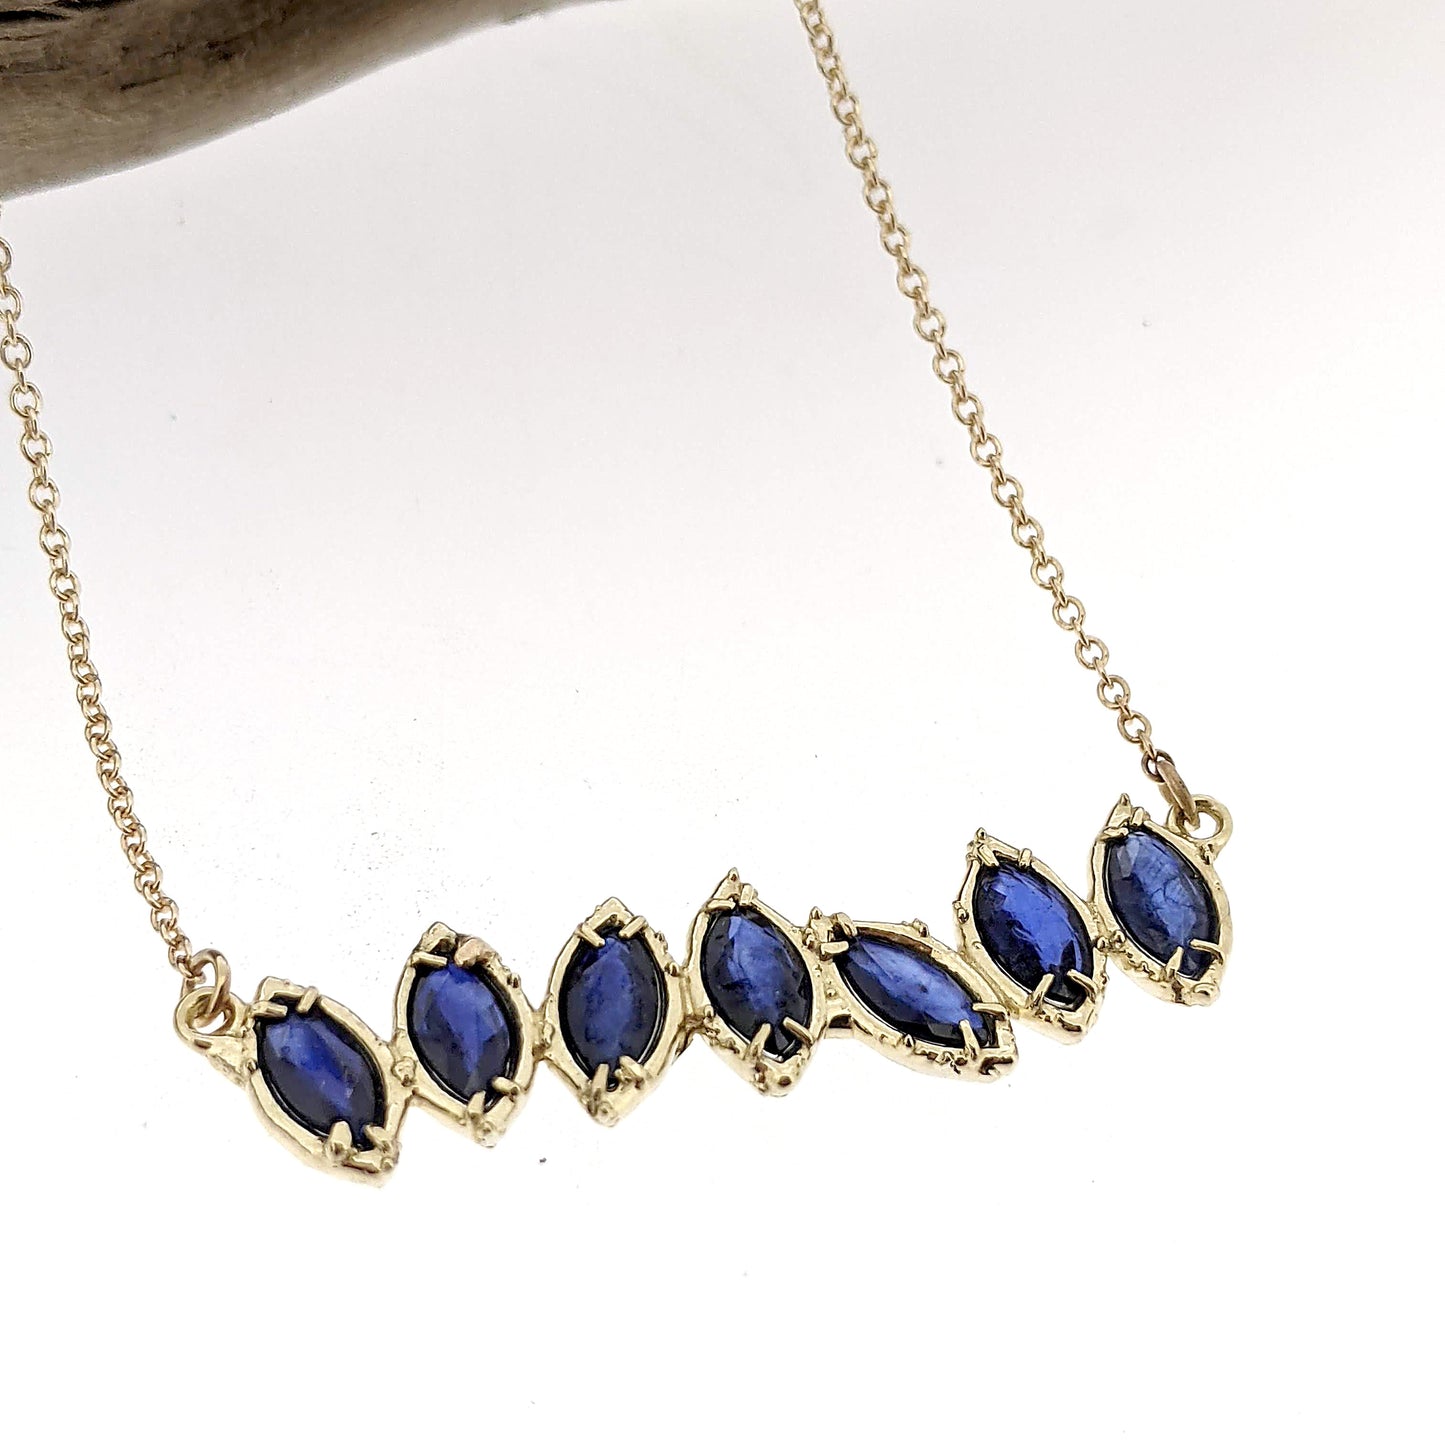 Close up view of pendant on Sapphire Cherin Necklace. Seven Sparkling natural marquise shaped Blue Sapphire stones delicately adorn this irregular line-style bar necklace with subtle organic detailing. 